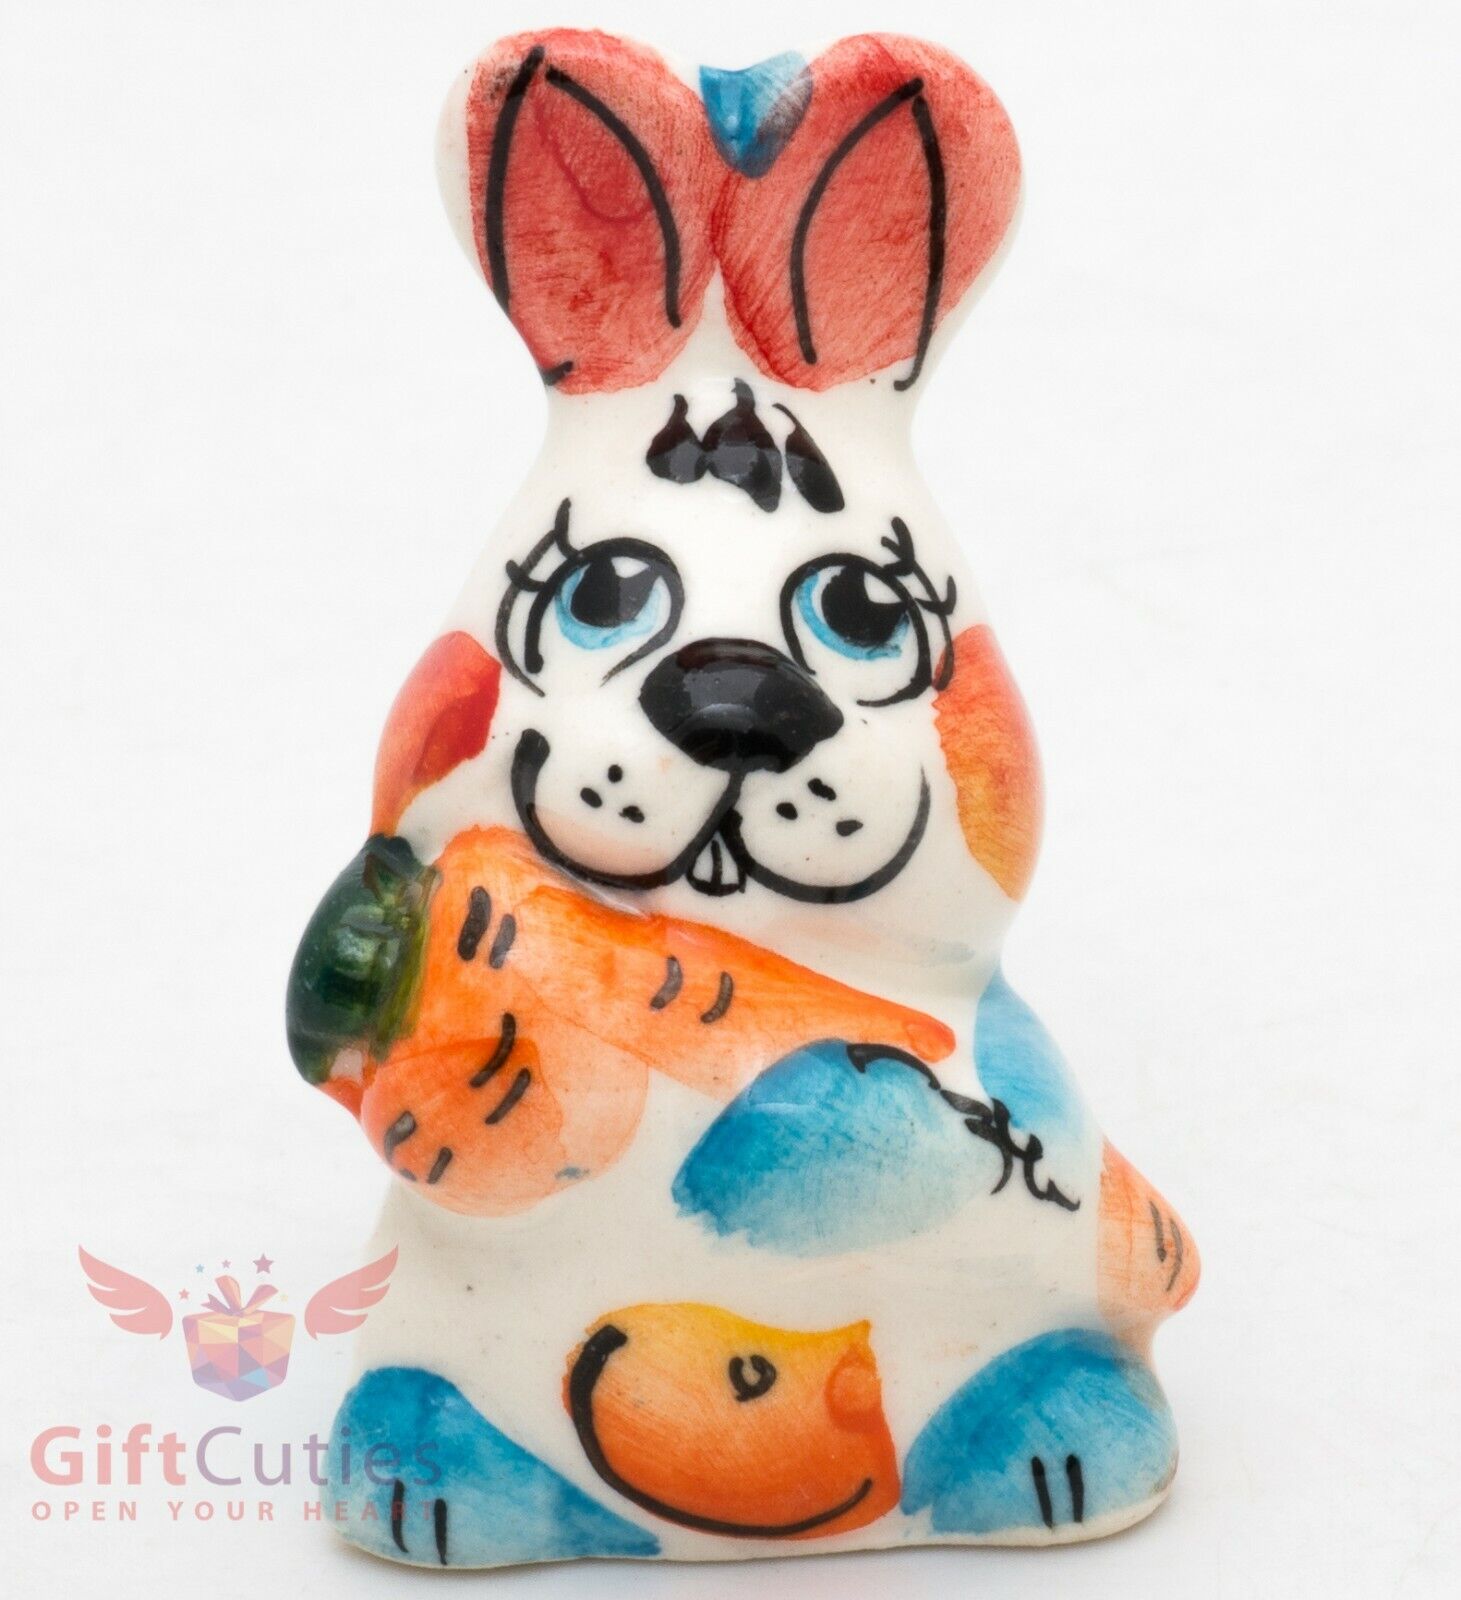 Gzhel Porcelain Figurine Easter Bunny Rabbit Hare with carrot gift hand-painted